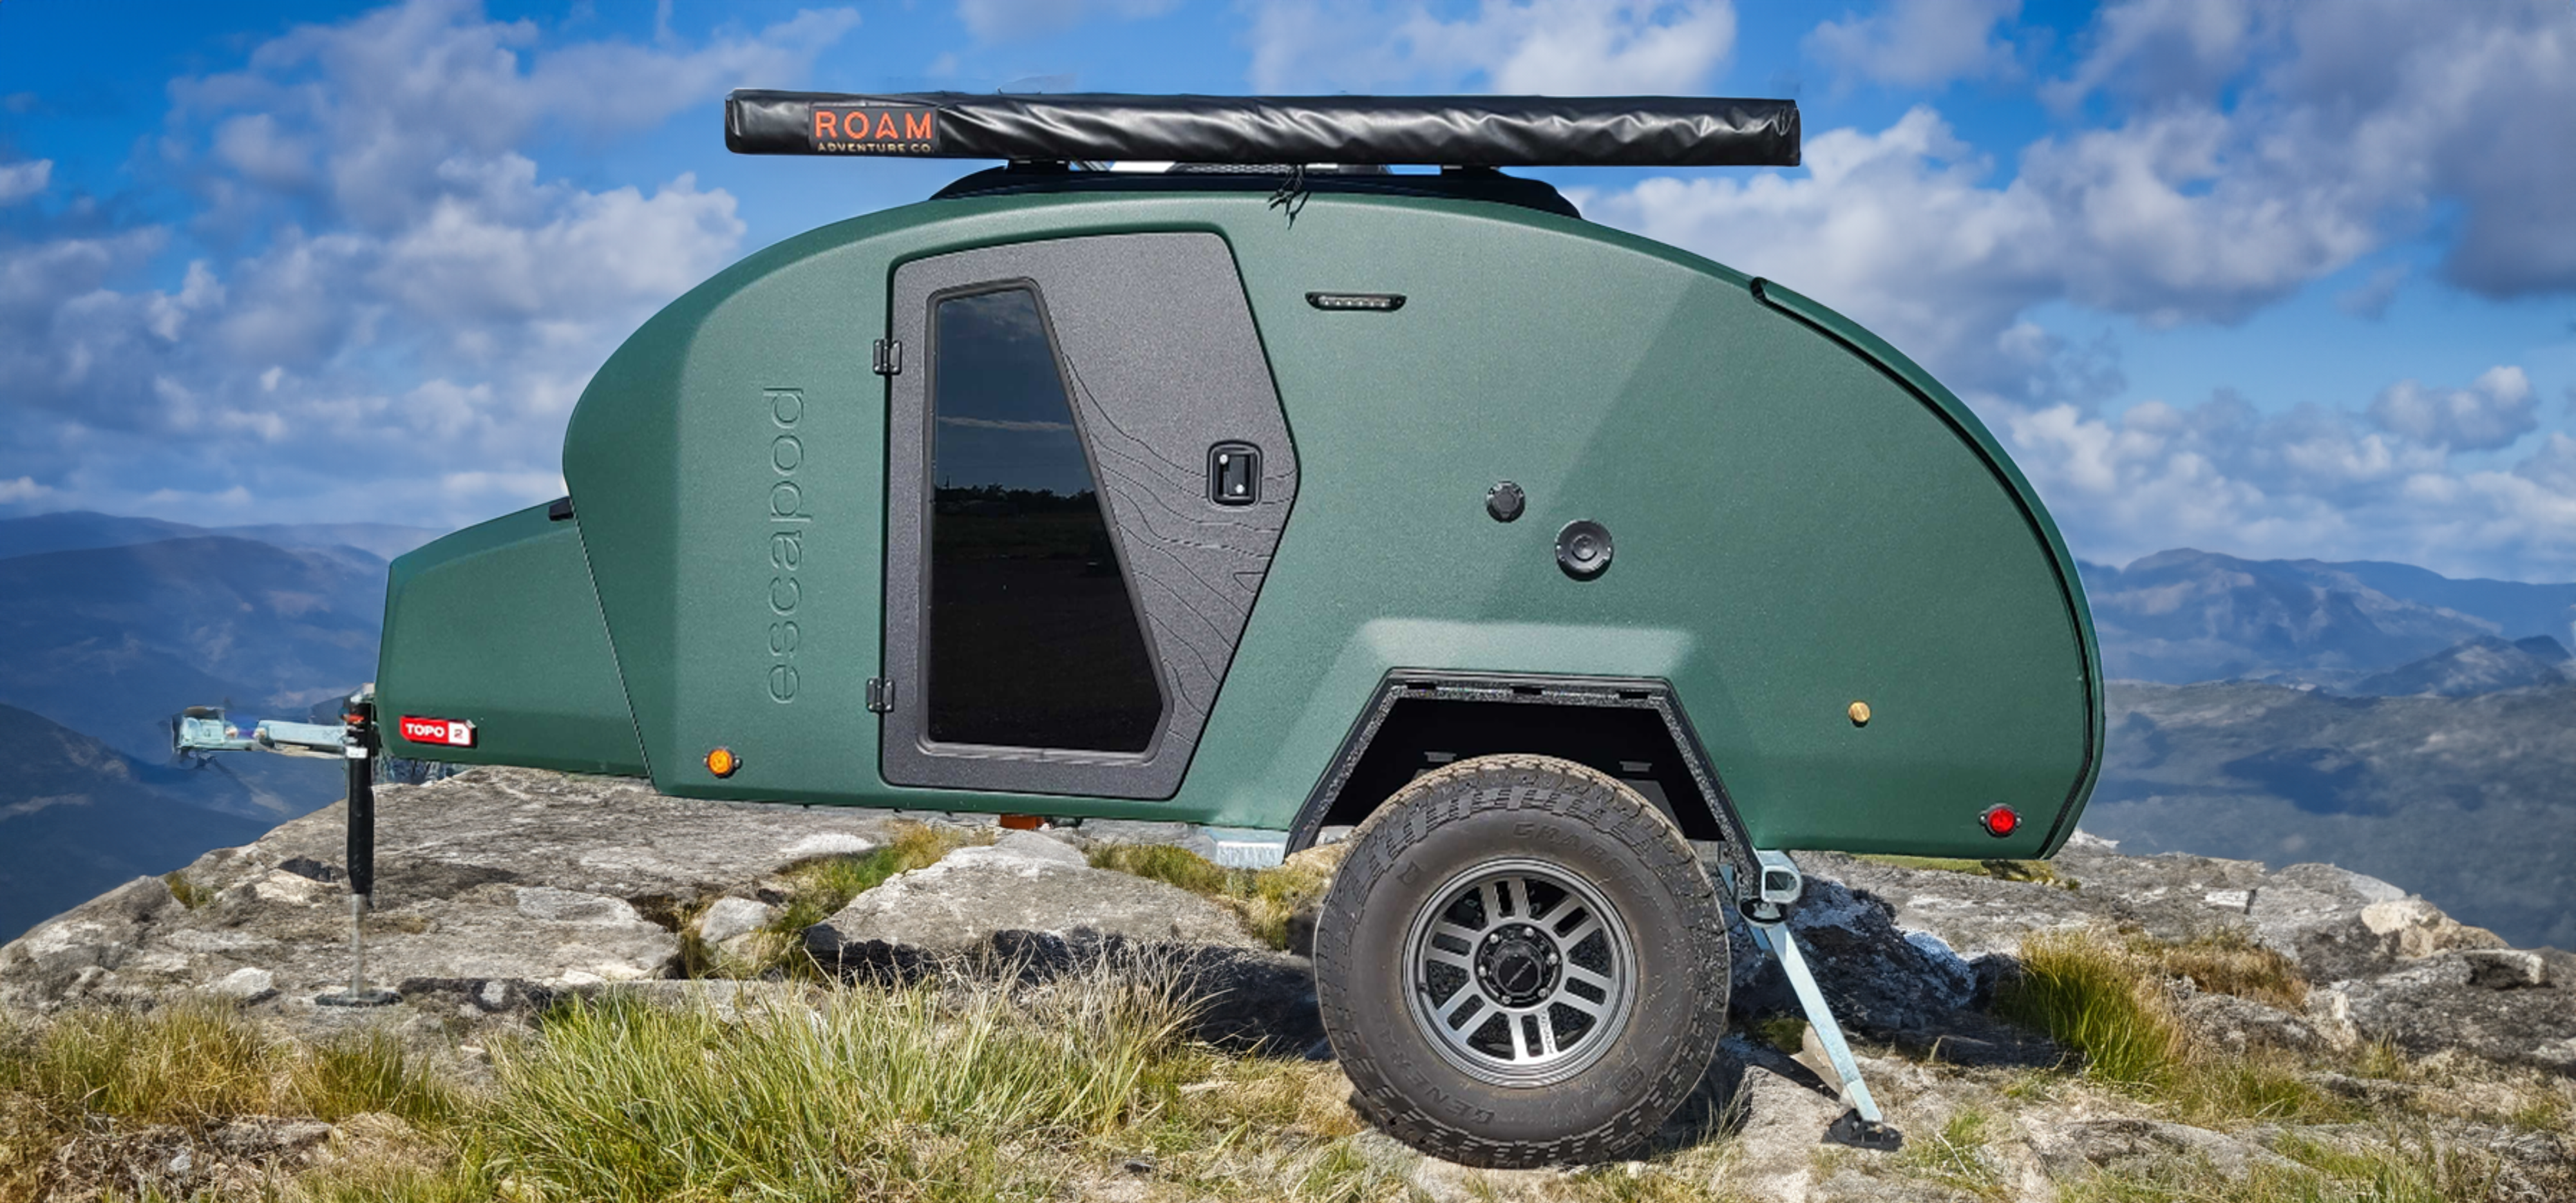 We're thrilled to announce the exciting partnership between BTR Outfitters and Escapod Trailers.